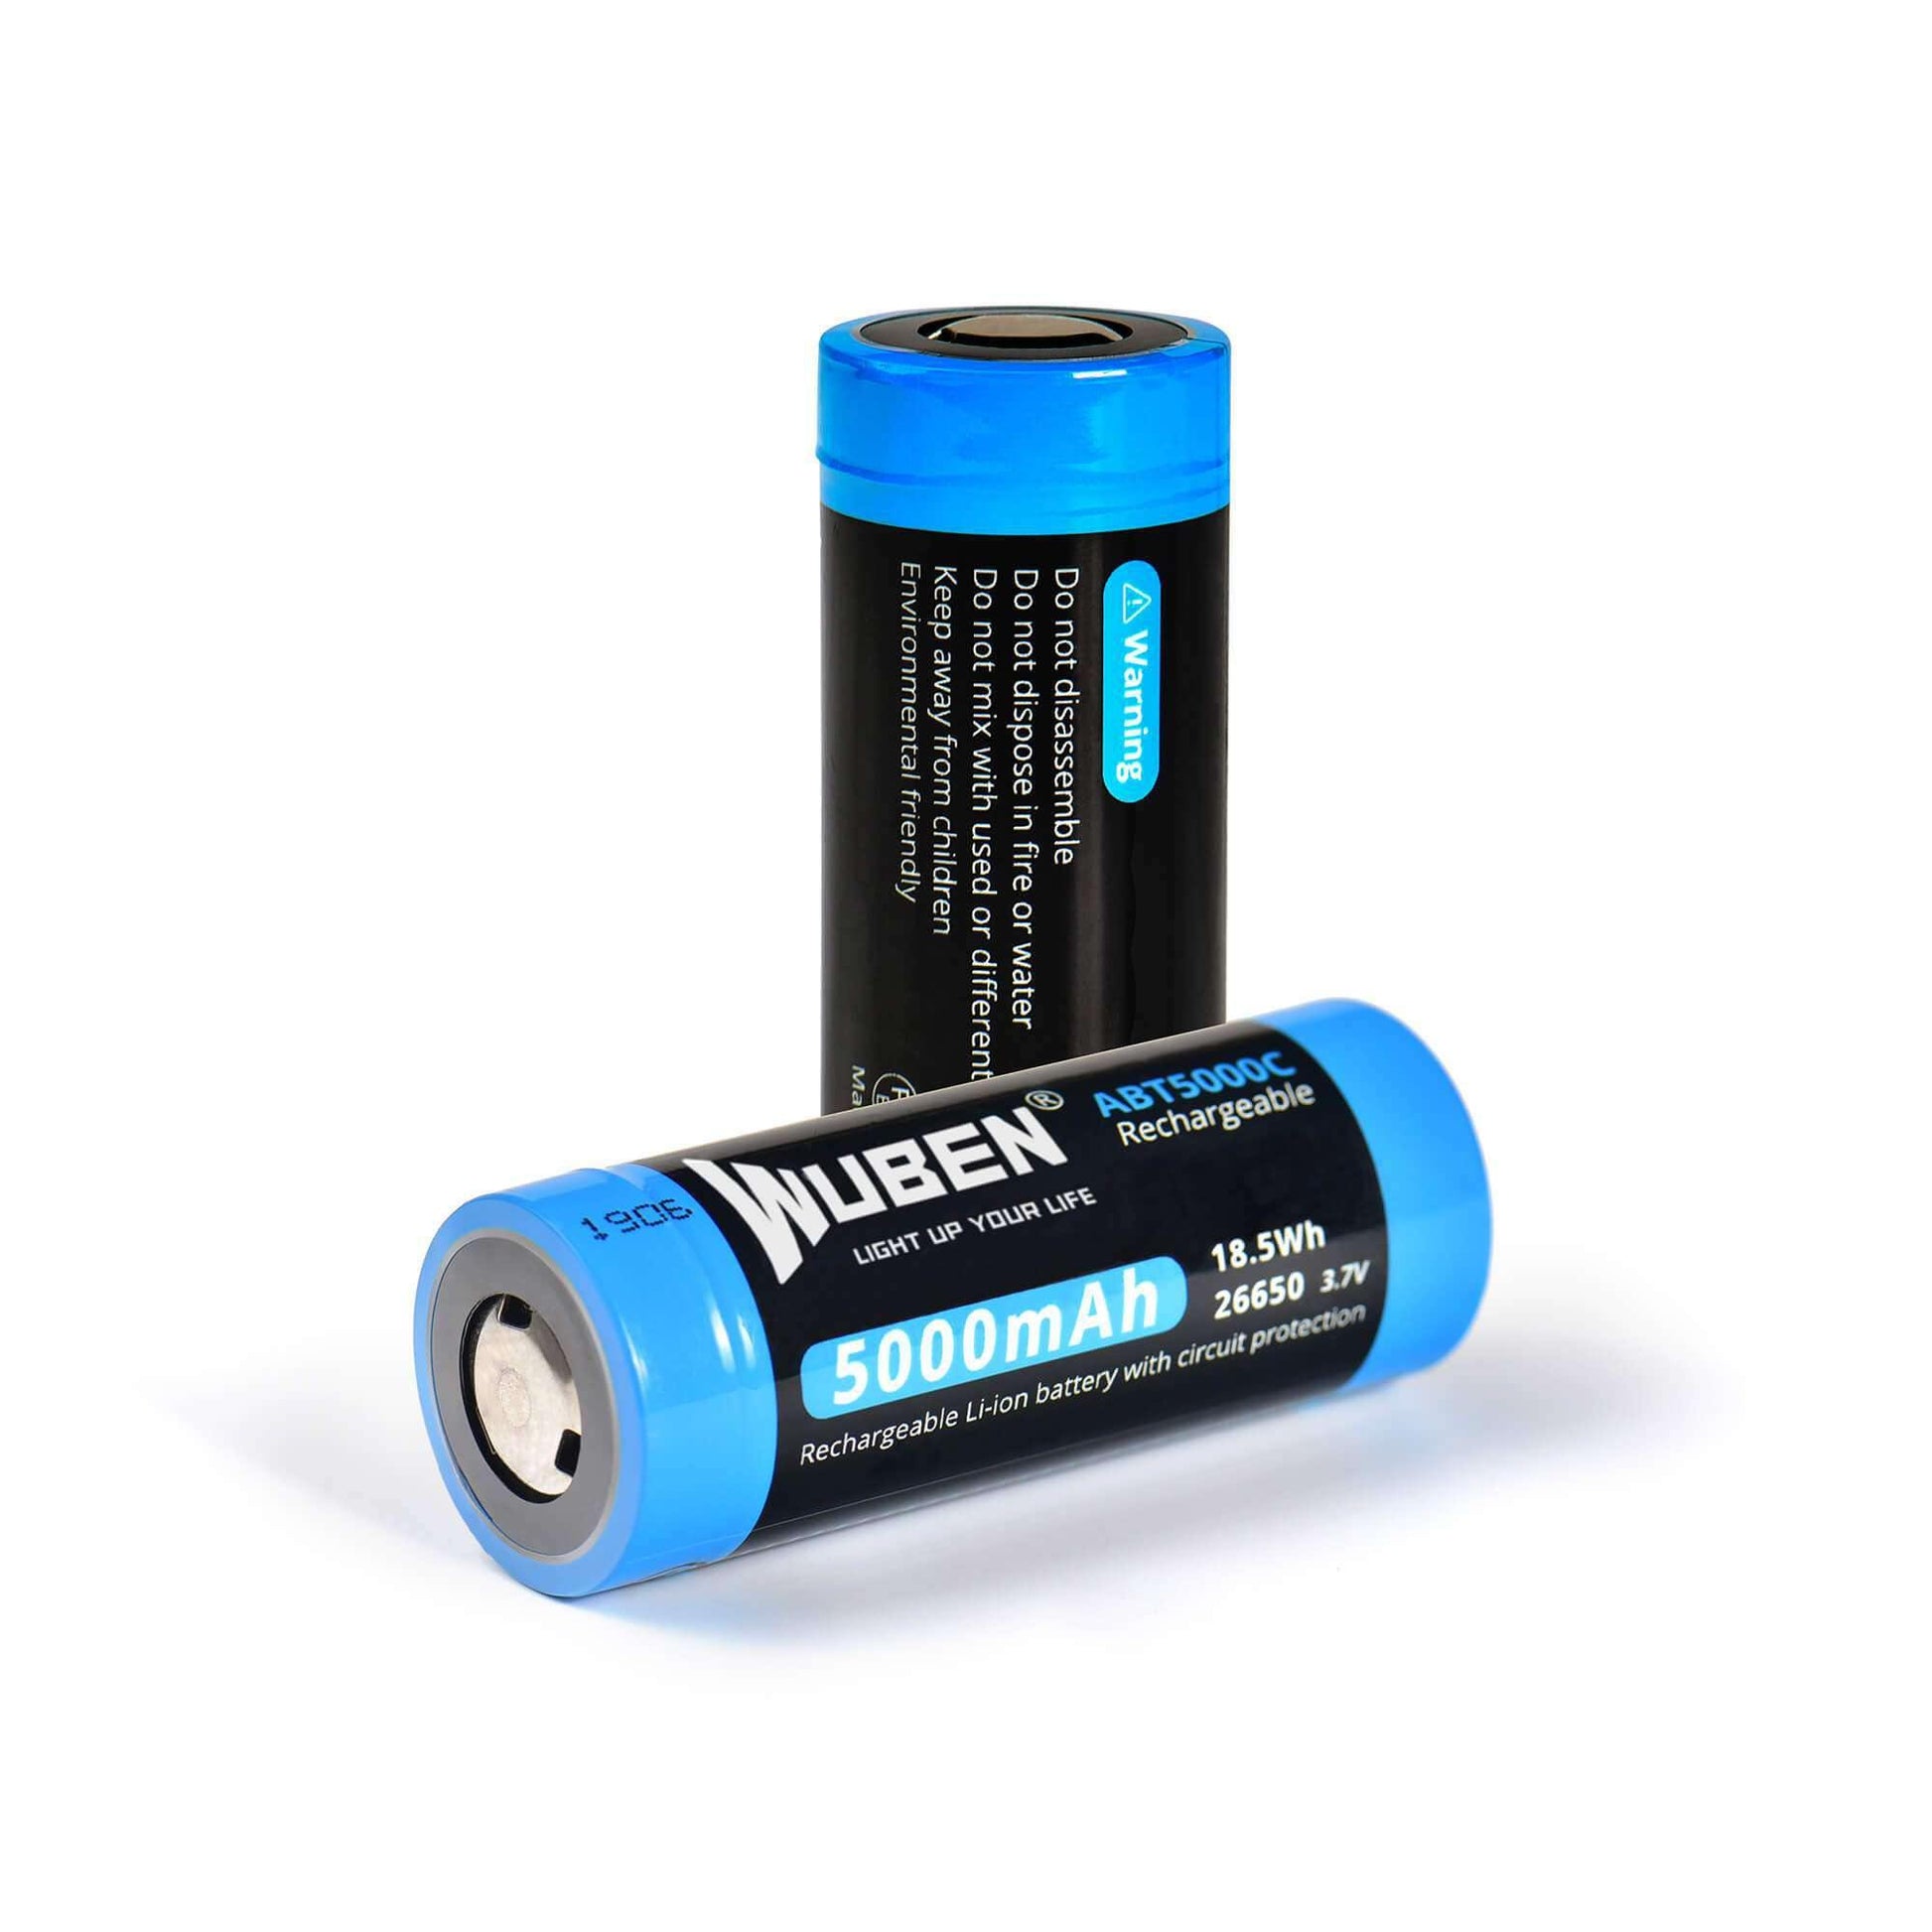 ABT5000C 26650 5000mAh rechargeable Protected lithium battery - WUBEN